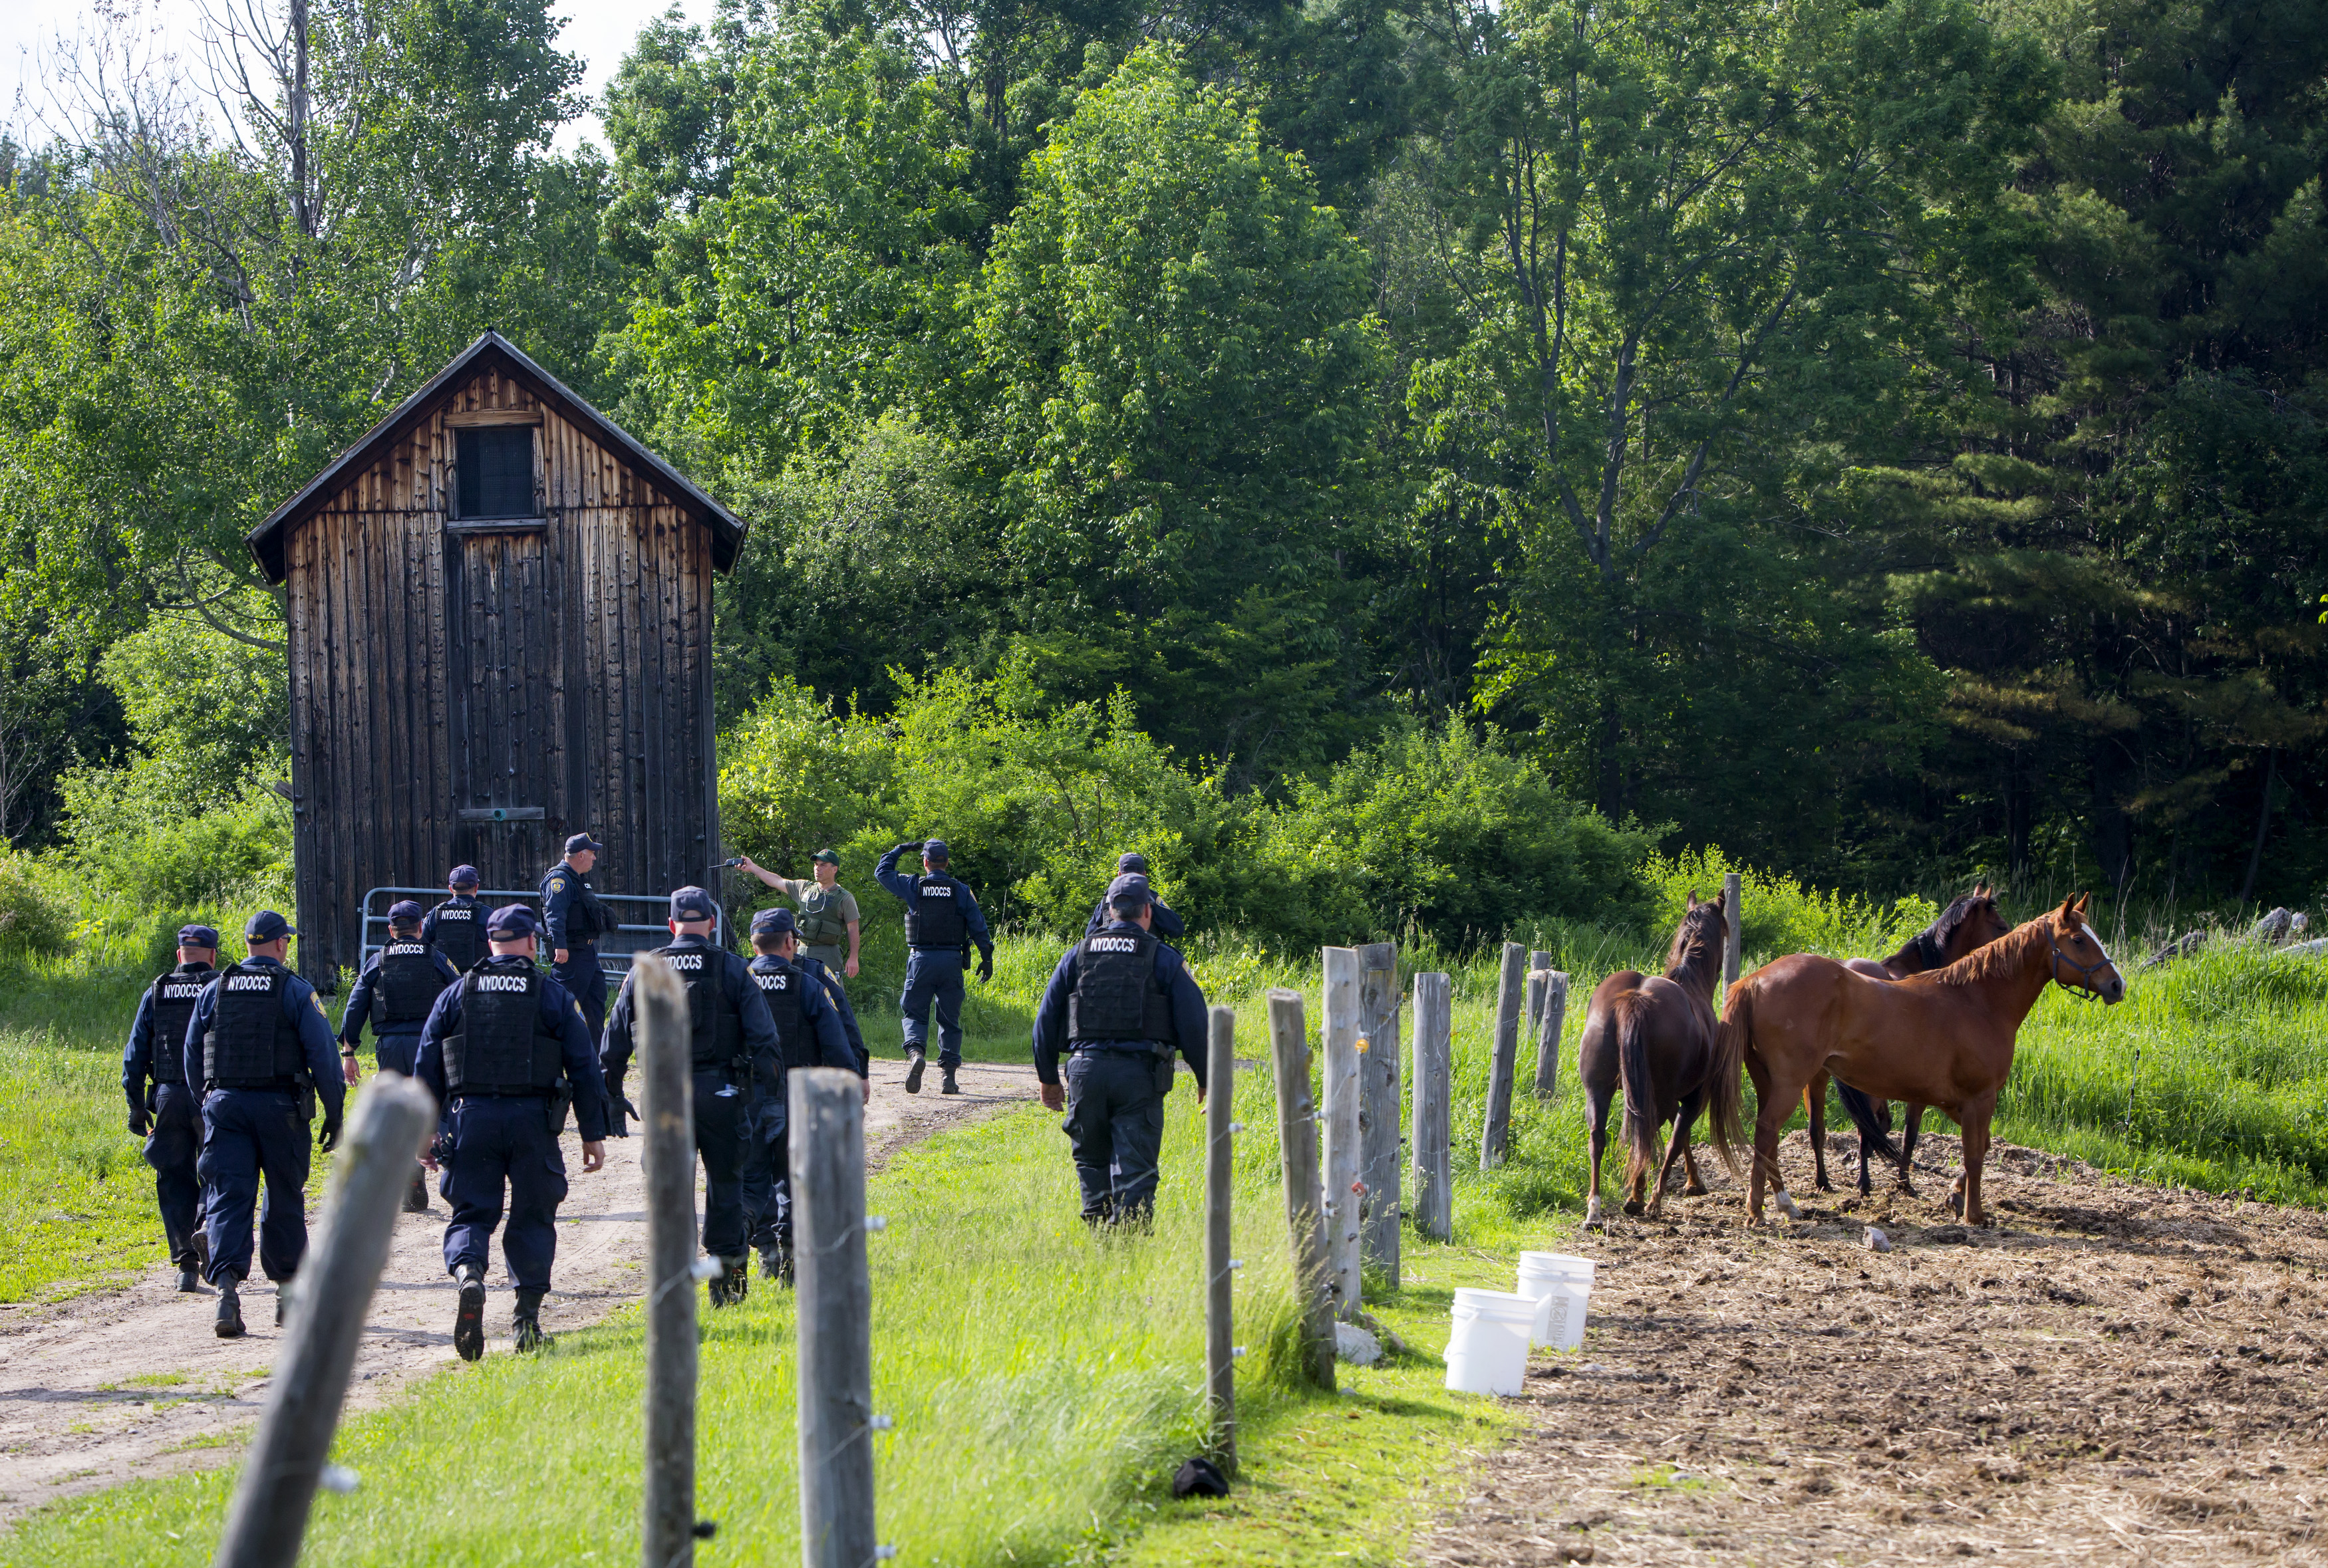 Police search the area around the Clinton Correctional Facility for David Sweat and Richard Matt. (Getty)